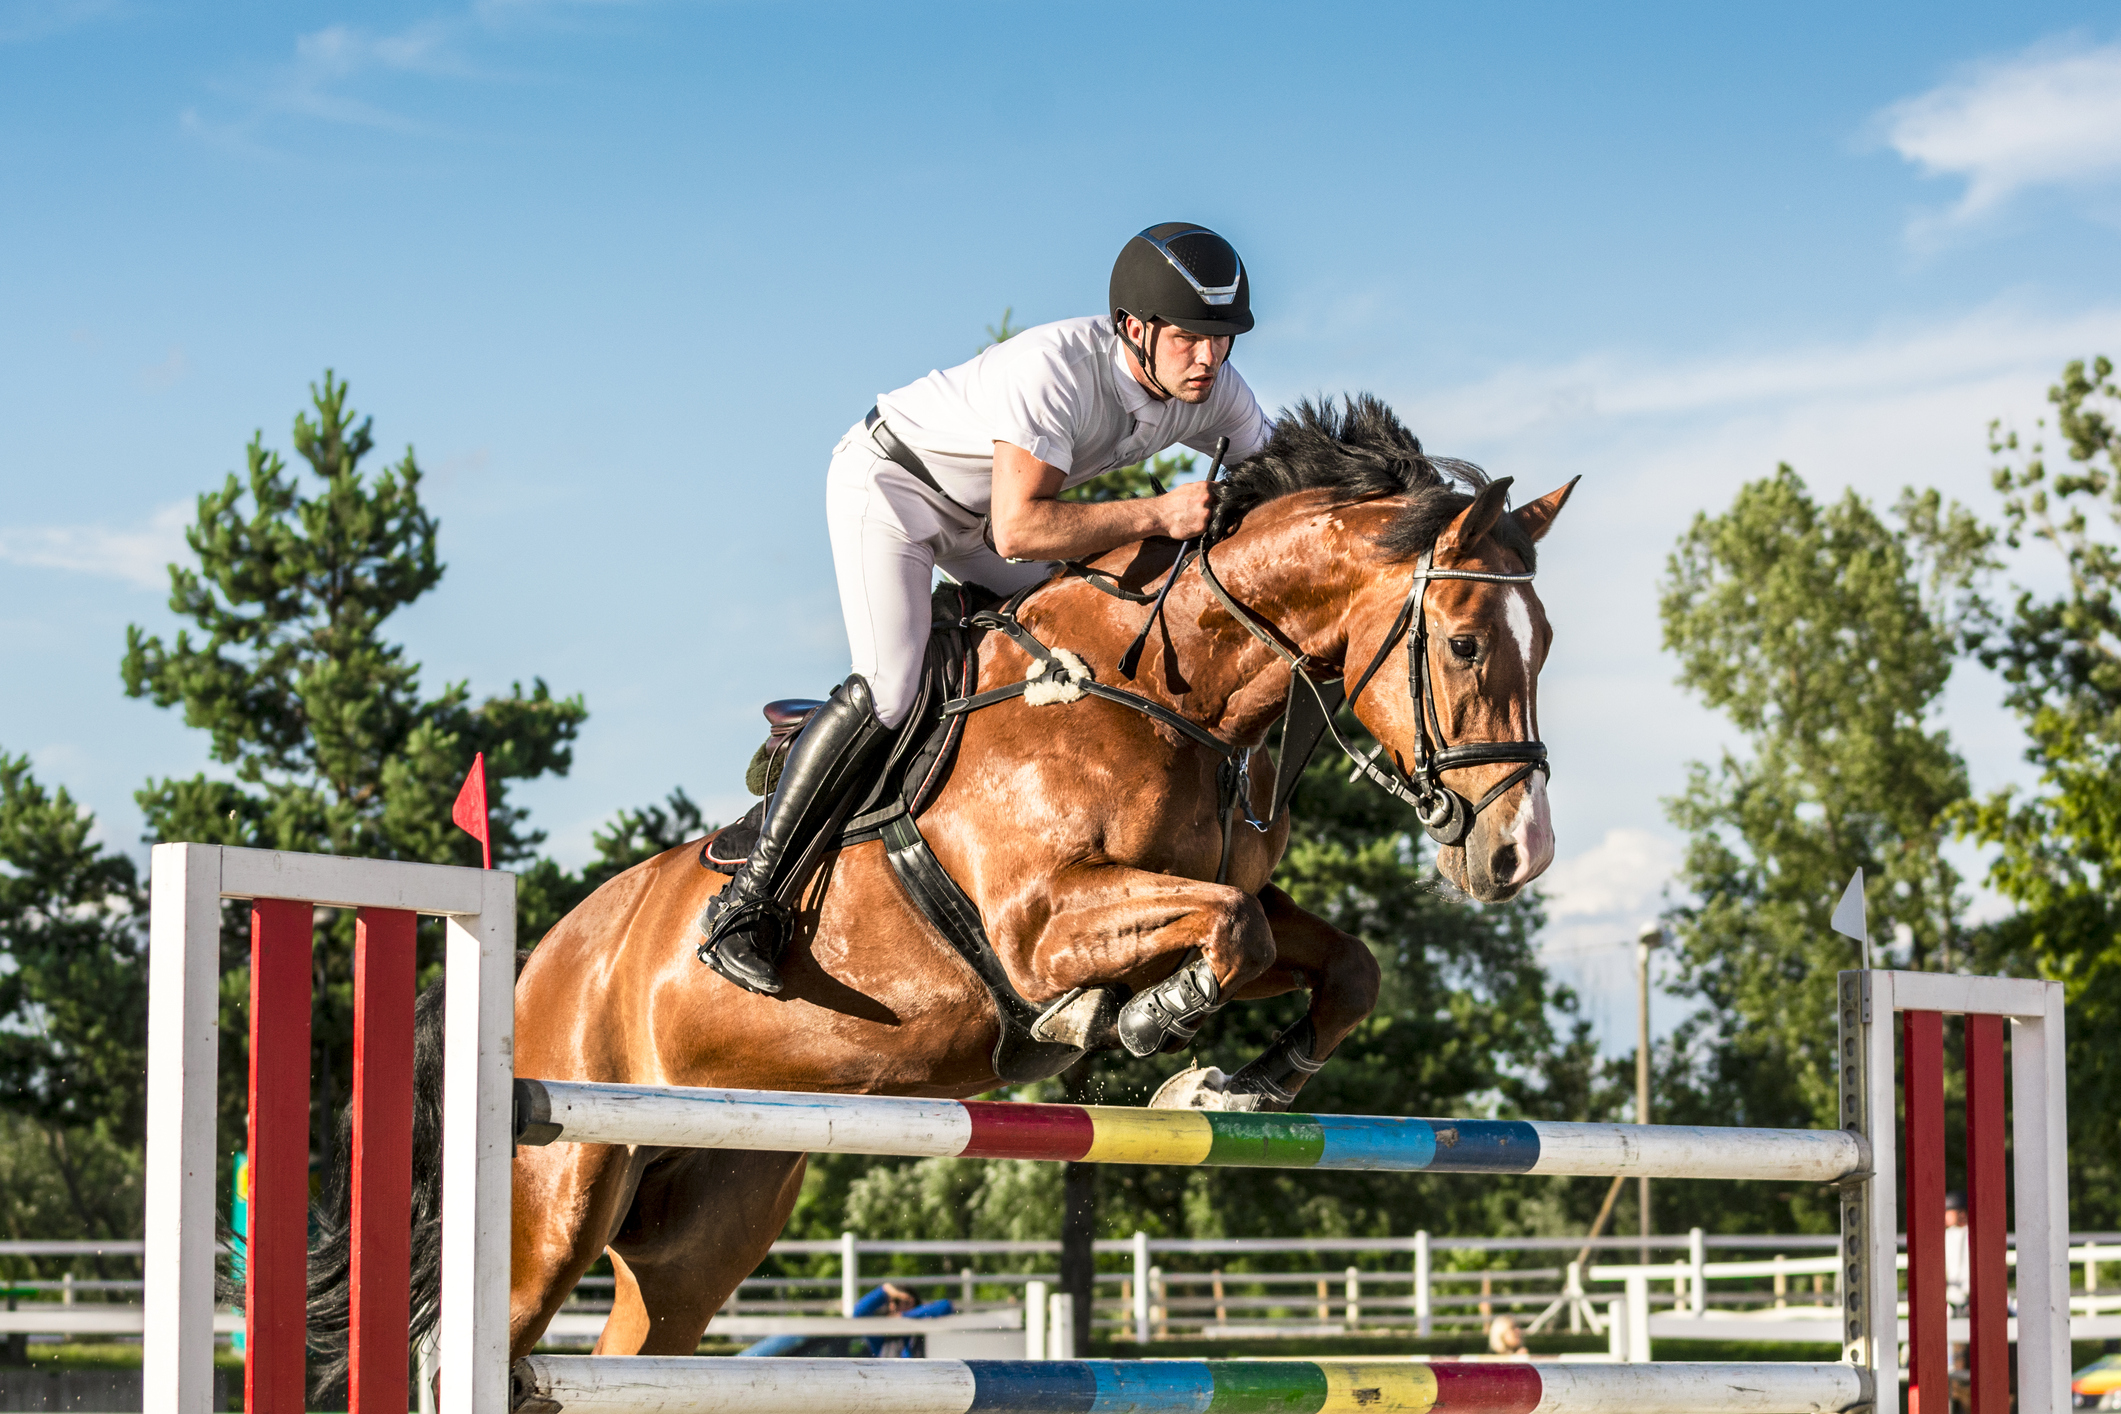 Equestrian rider and horse in action, jumping over a hurdle.